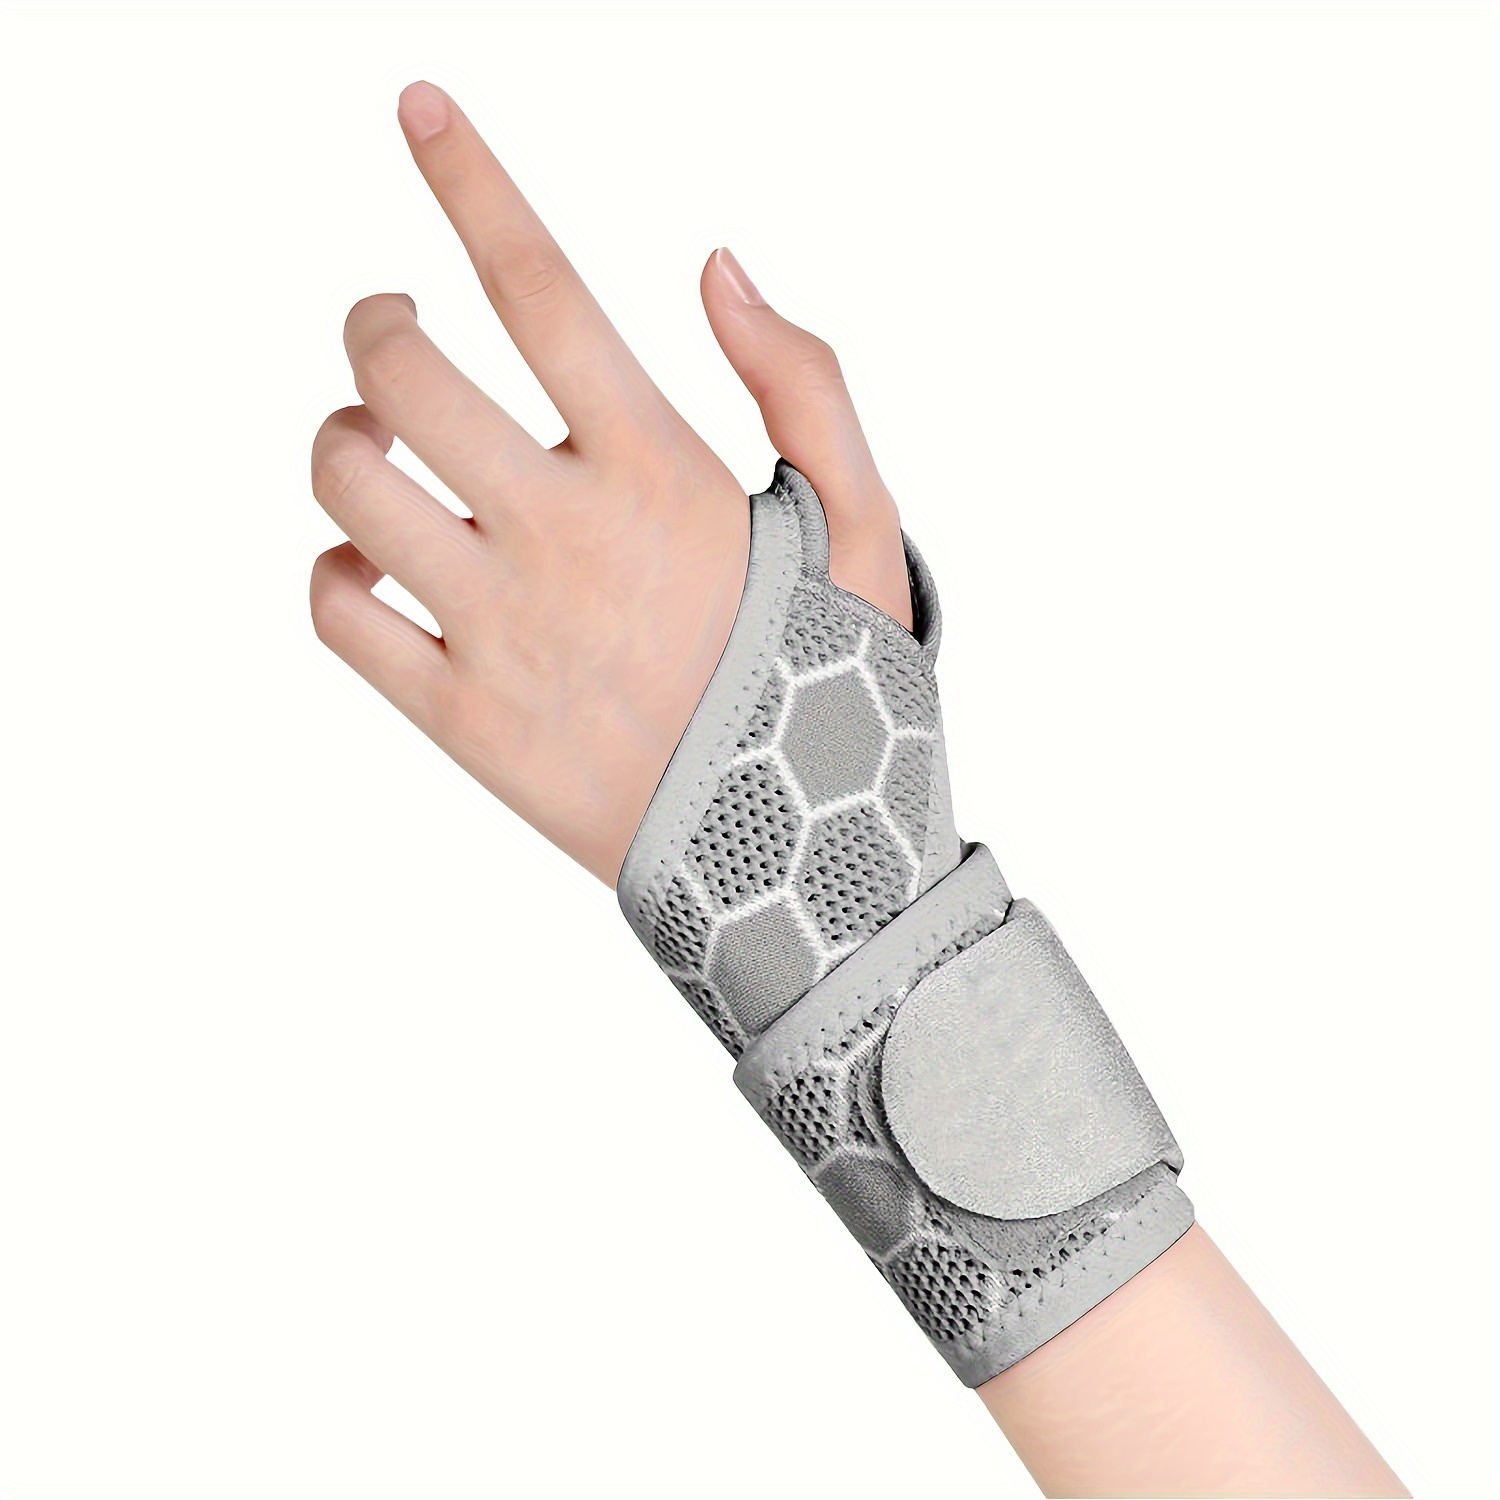 Wrist Brace,Profession Adjustable Compression Wrist Supports for Gym  Reversible Wrist Wraps Thumb and Wrist Support,for Sports Protecting  Arthritis